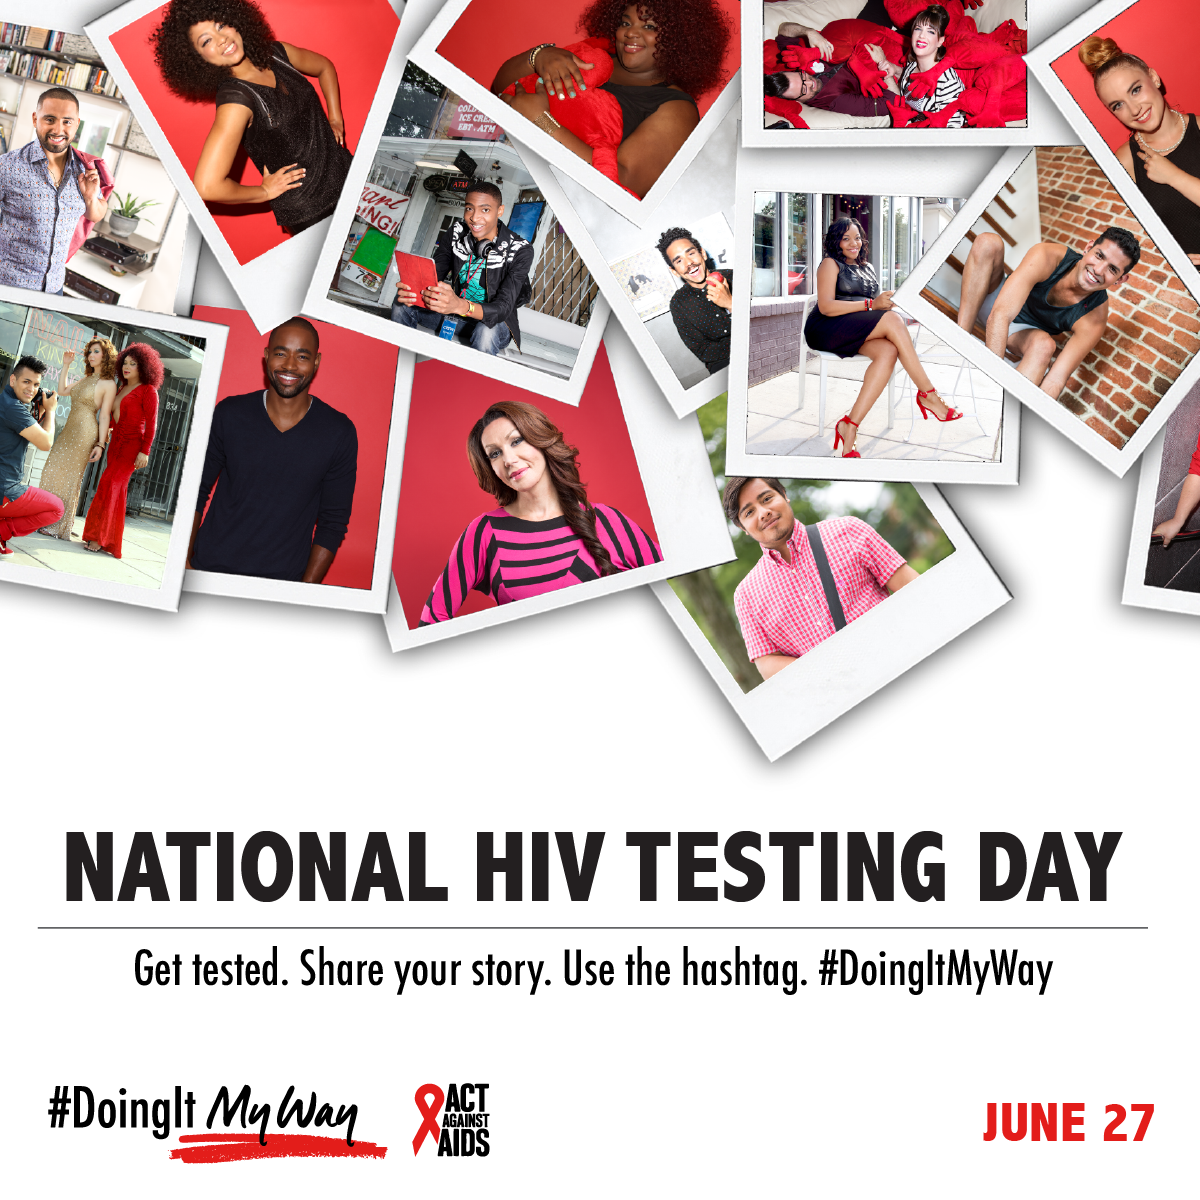 A graphic promoting National HIV Testing Day